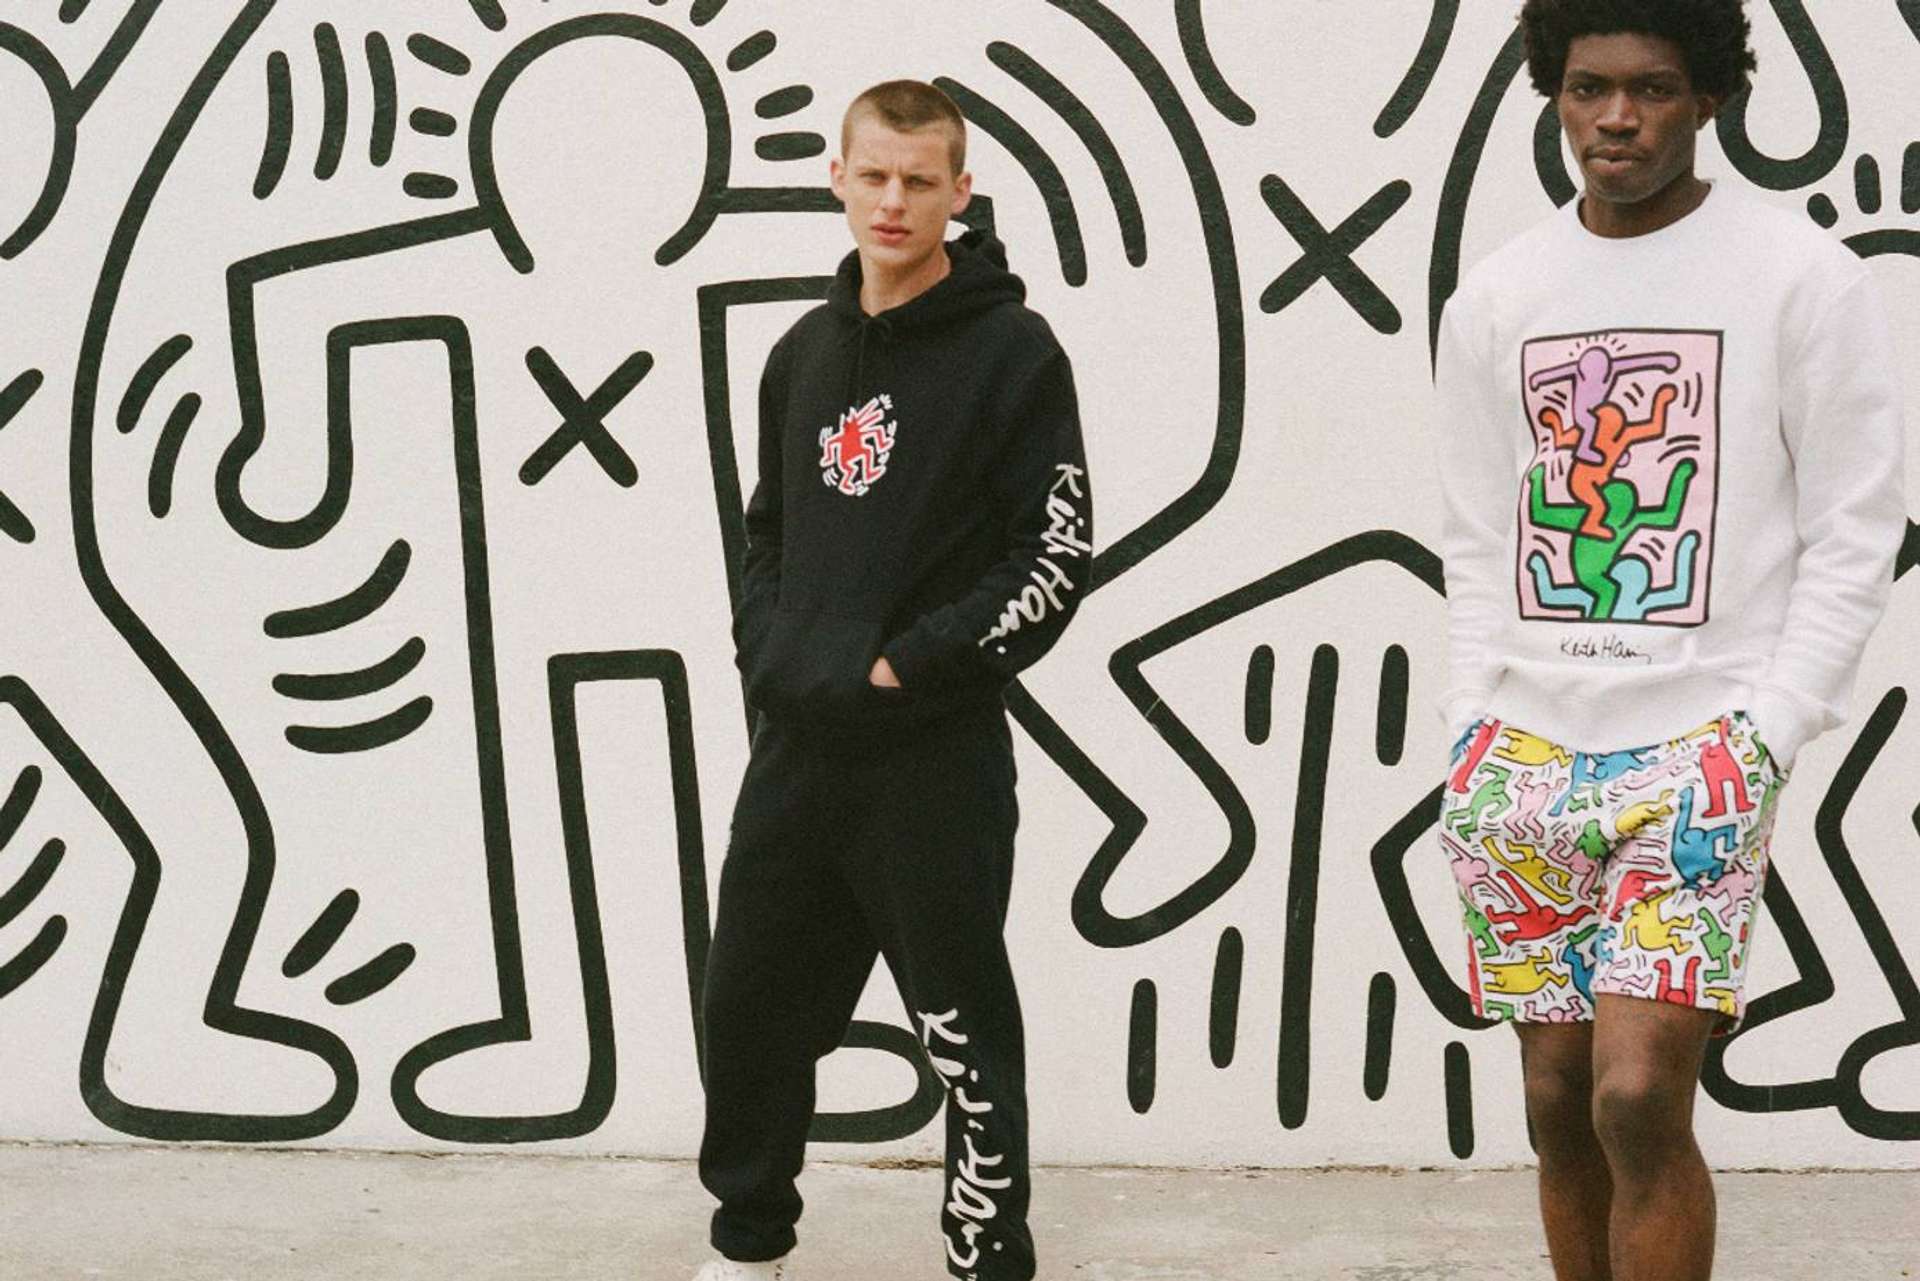 An image of two models wearing apparel from H&M’s collaboration with Keith Haring, standing against a background featuring one of the artist’s iconic murals.